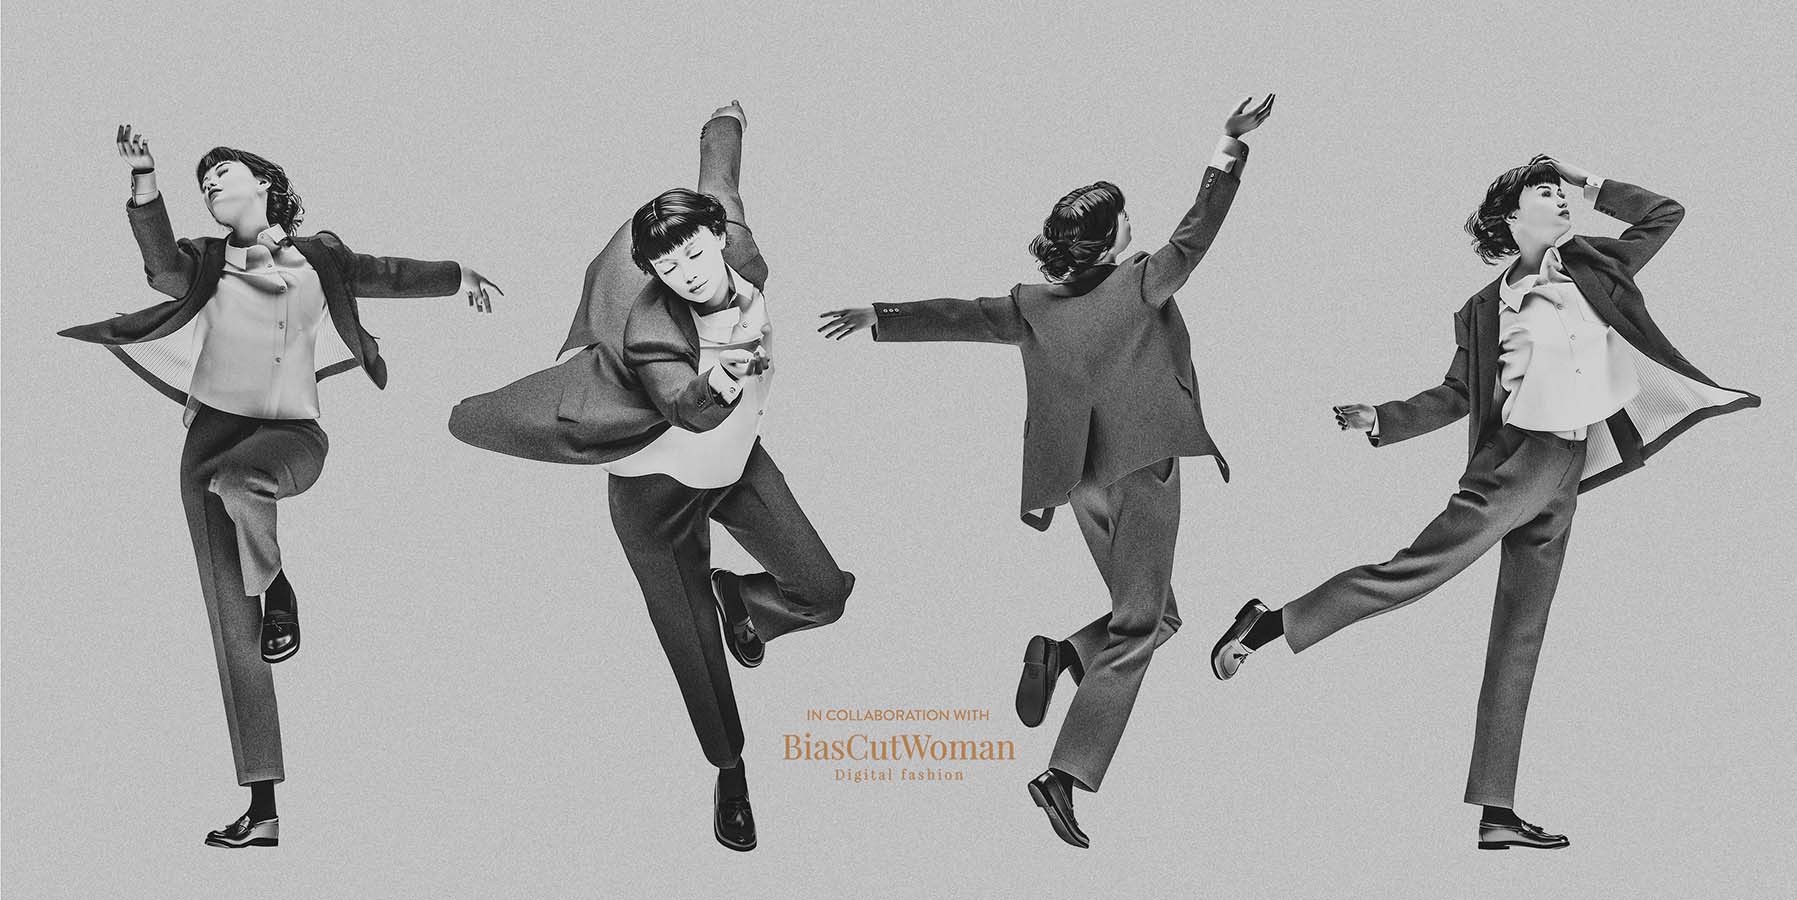 Black and white image of female avatar wearing tailored suit and penny loafers, shown in 4 dynamic poses across image.